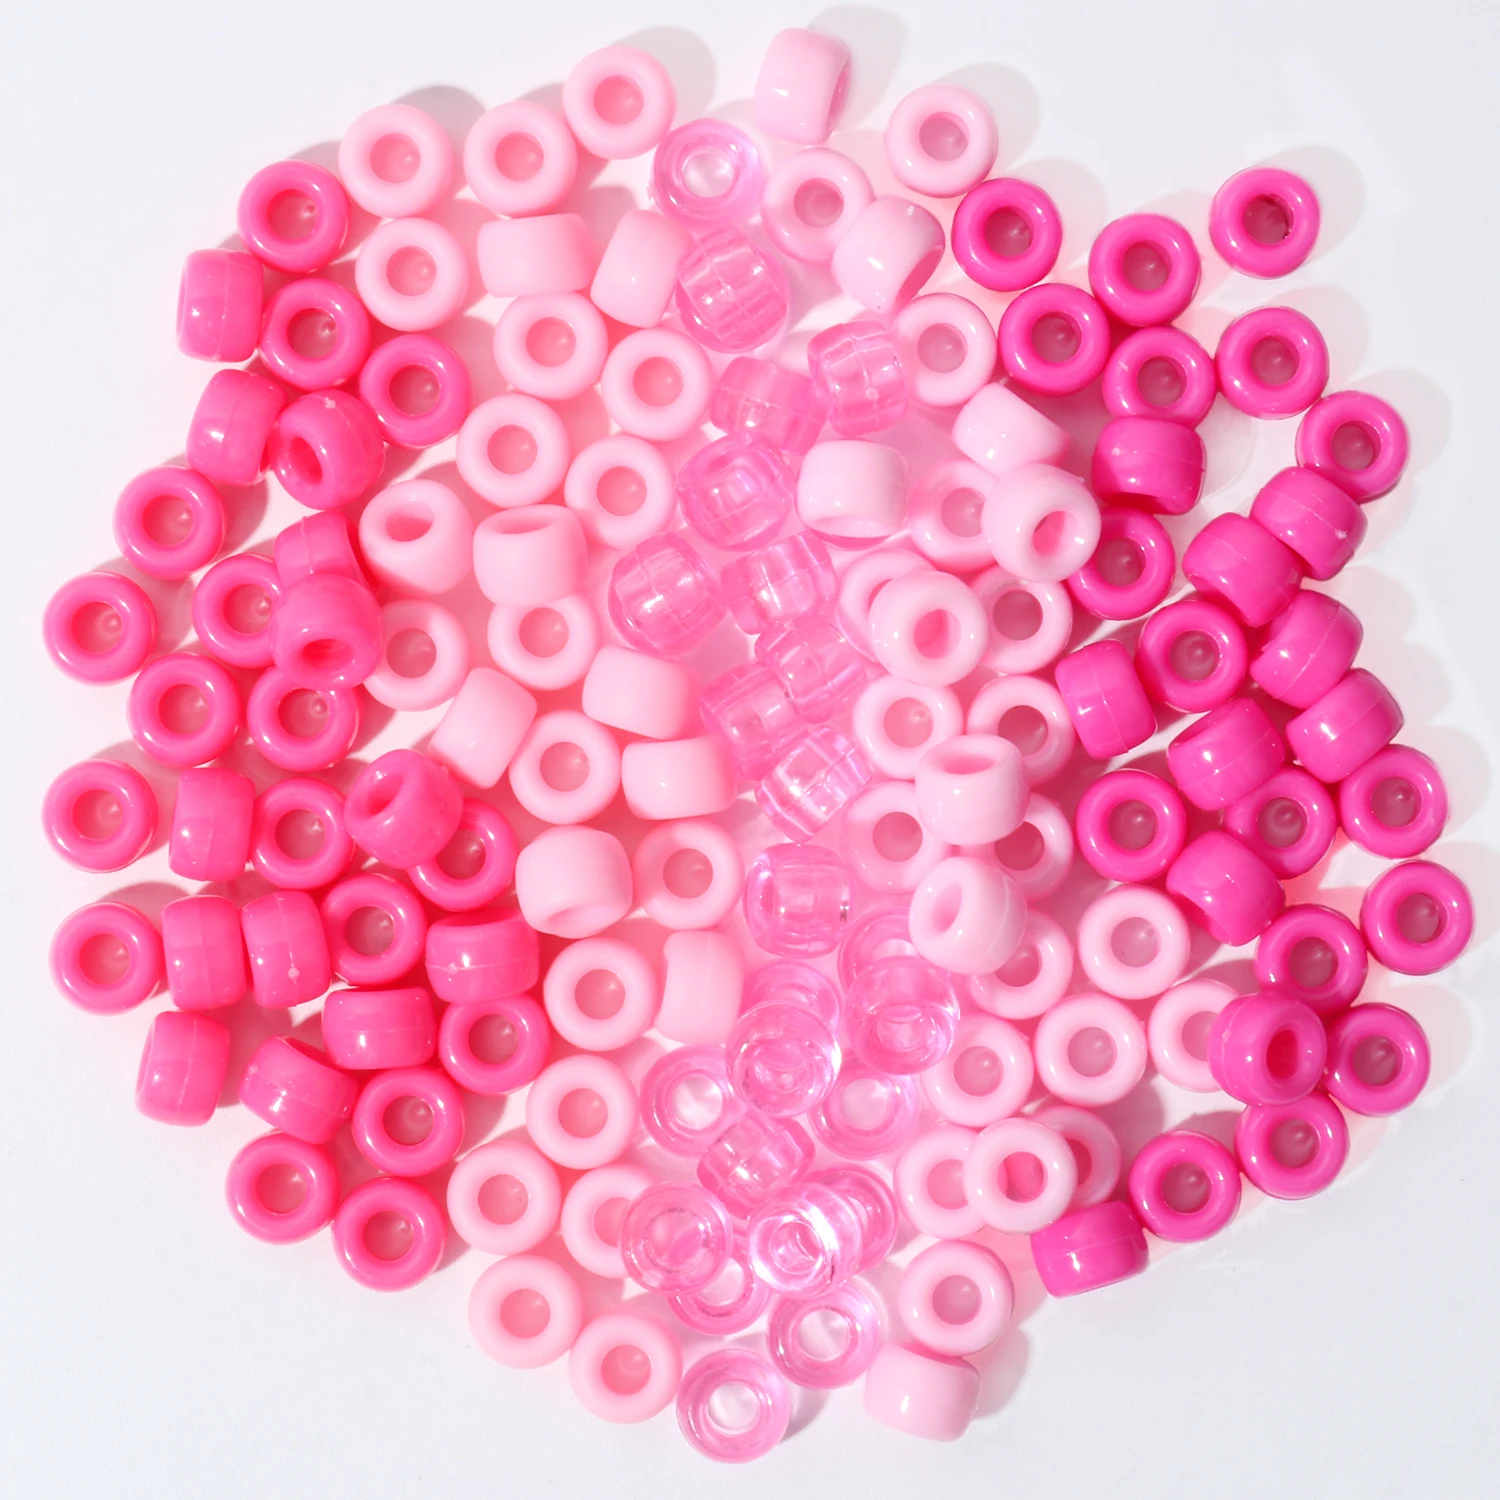 

Wholesale 1200pcs Pony Beads Pink Color Acrylic Flat Round Spacer Beads Jewelry Make Bracelets Necklace Accessory Christmas Gift